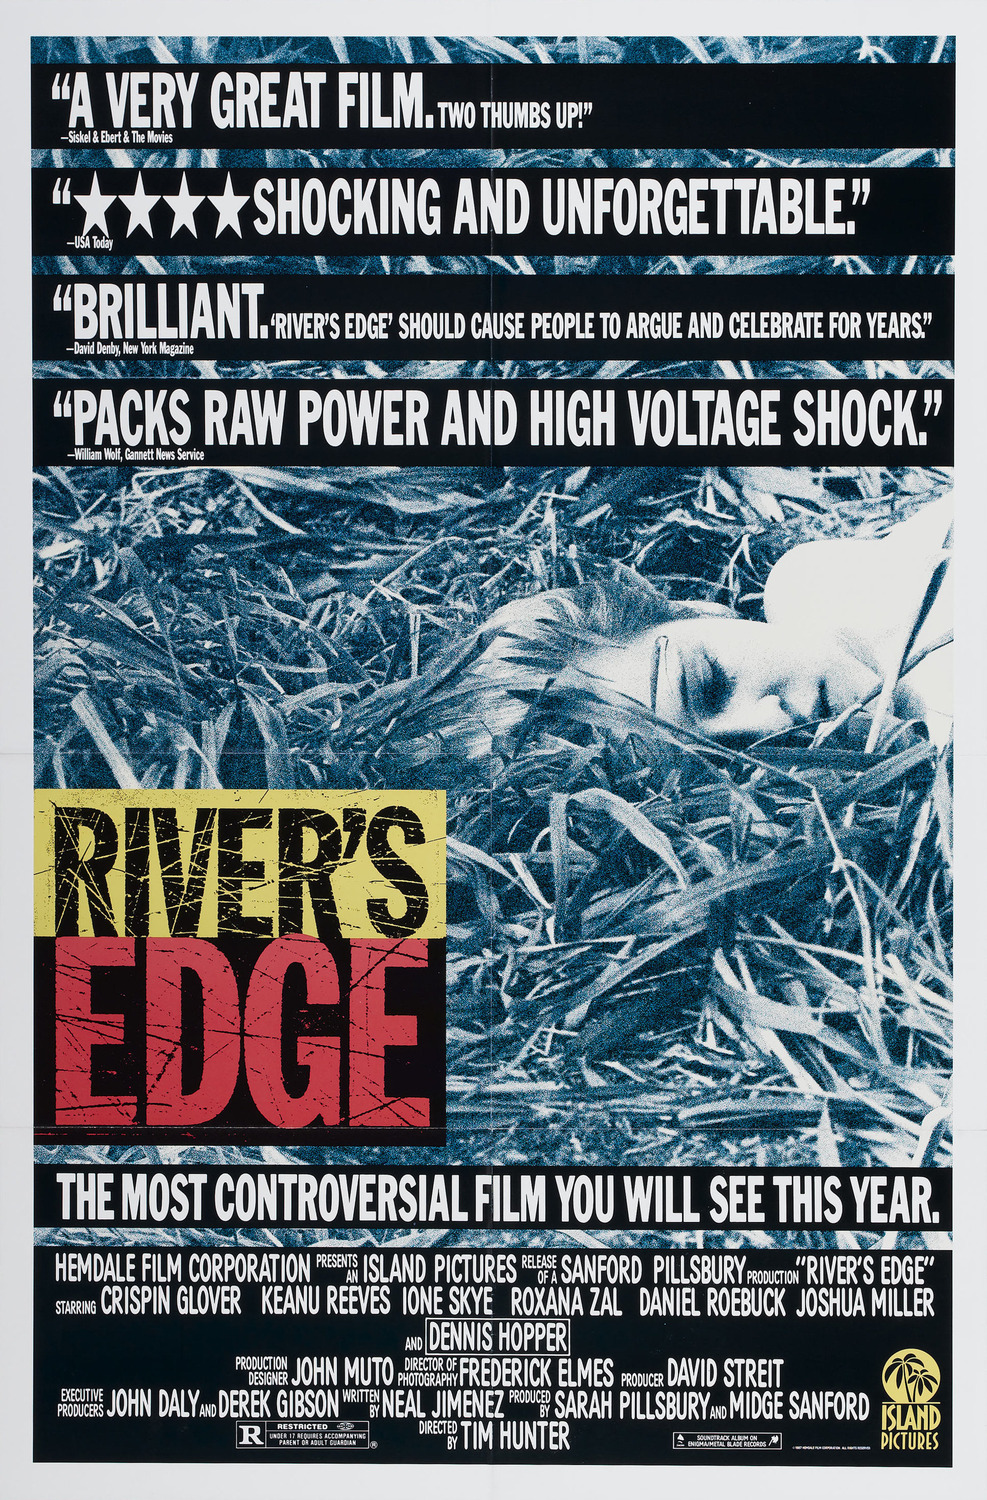 Extra Large Movie Poster Image for River's Edge 